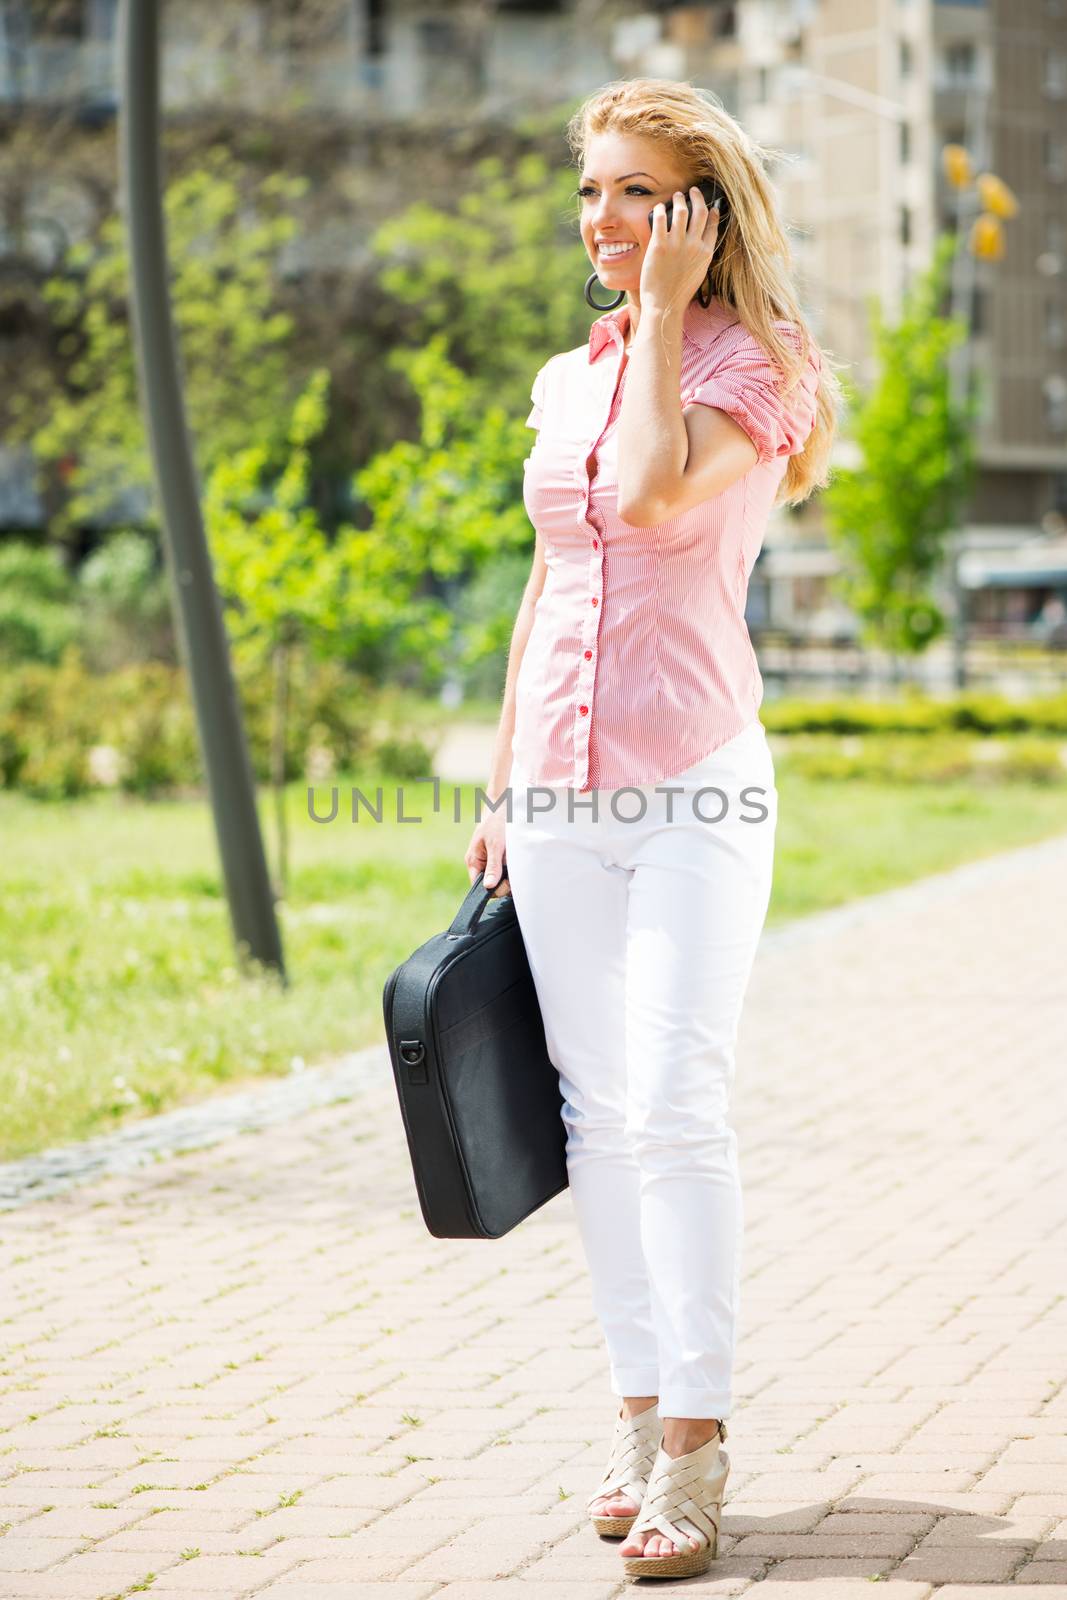 Beautiful young woman talking on phone and walking in the park.